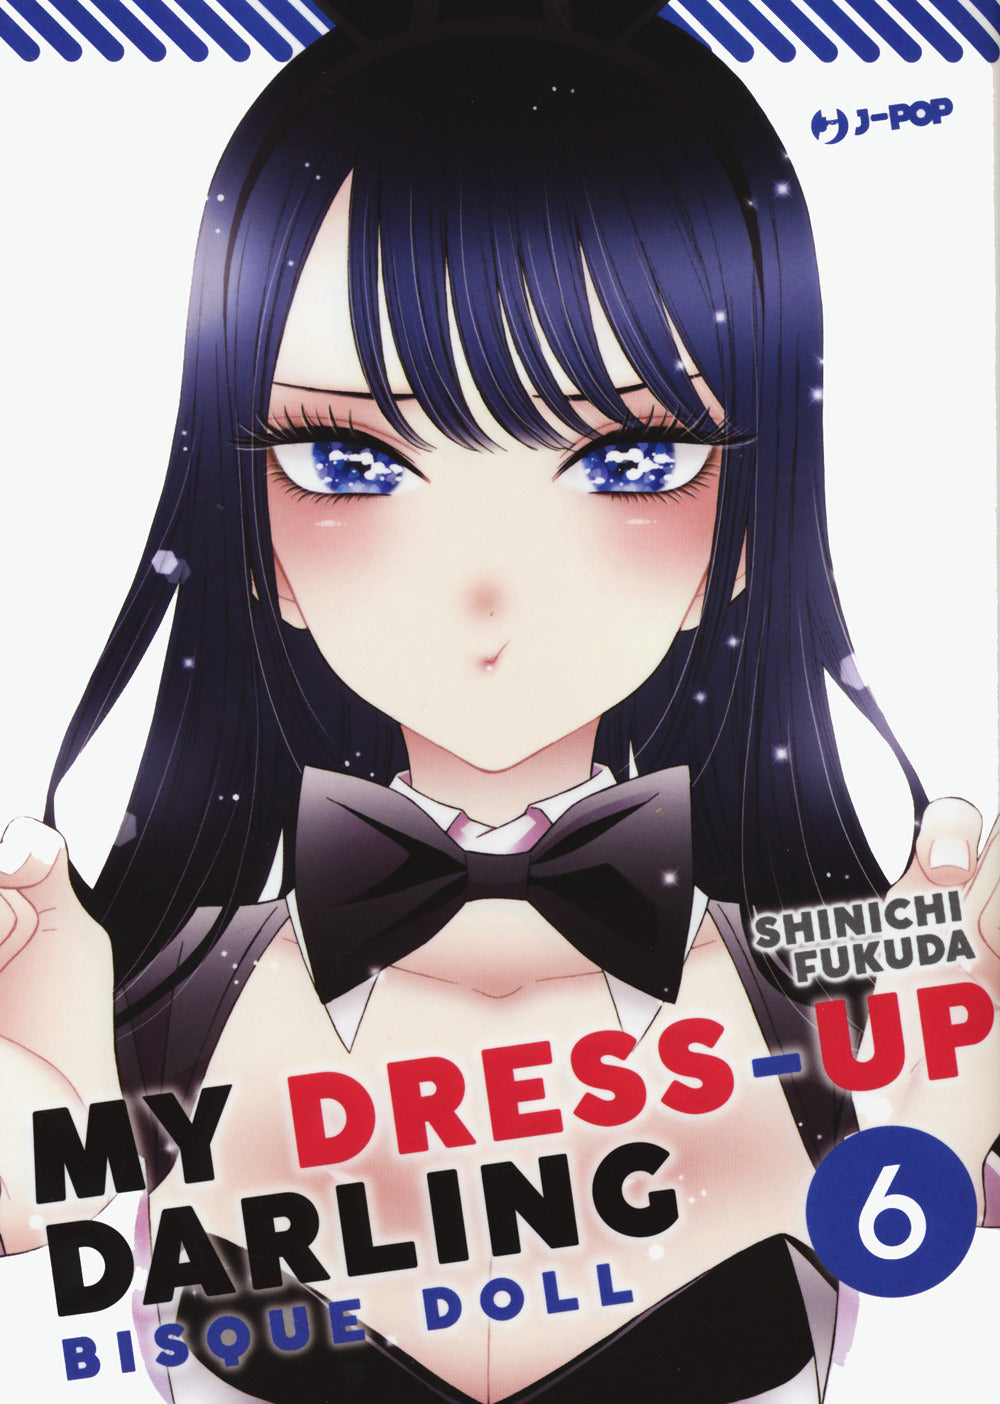 My dress up darling. Bisque doll. Vol. 6.